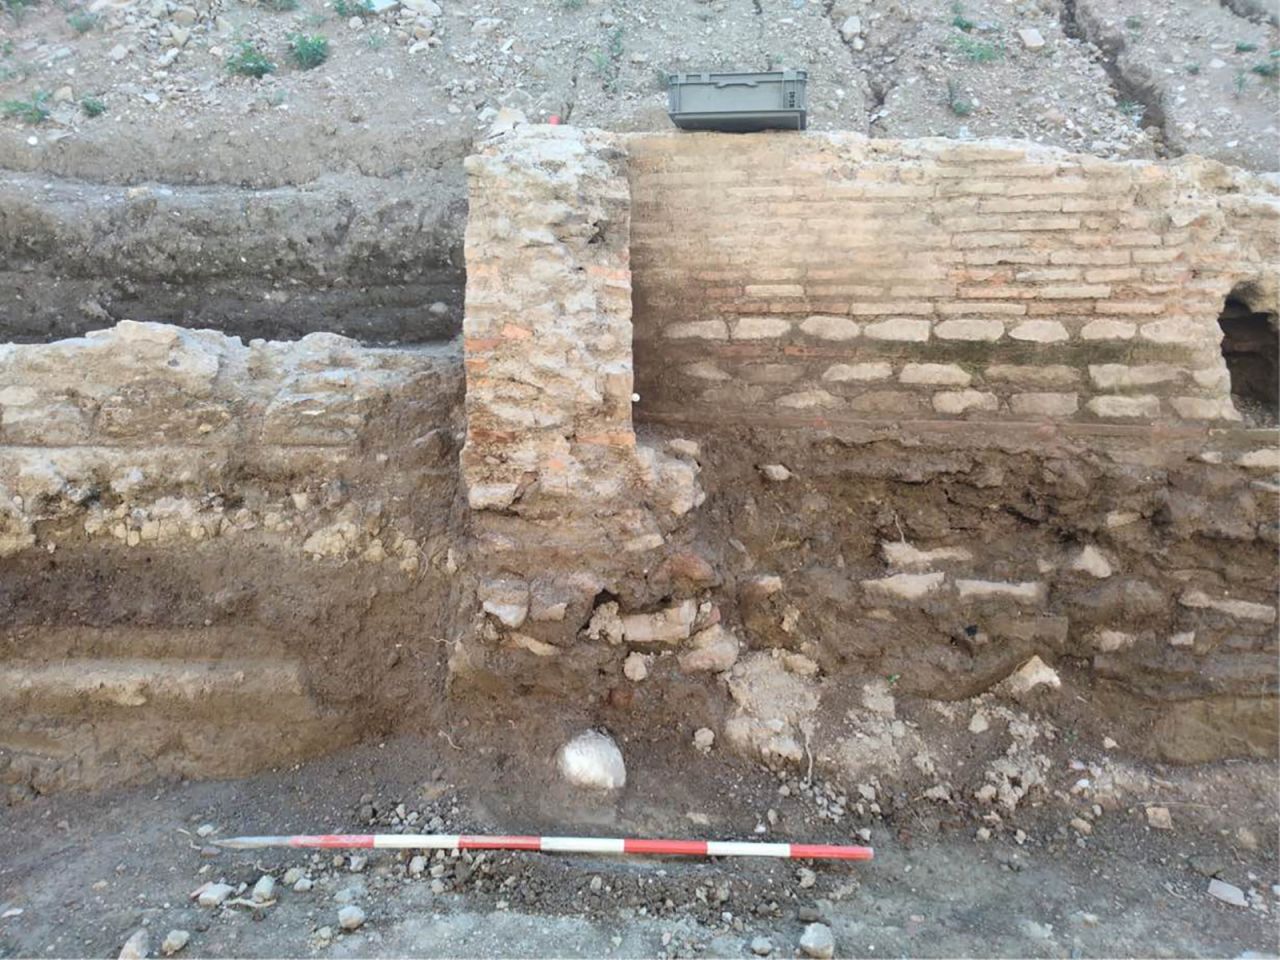 The head was found to be in the foundations of this wall.